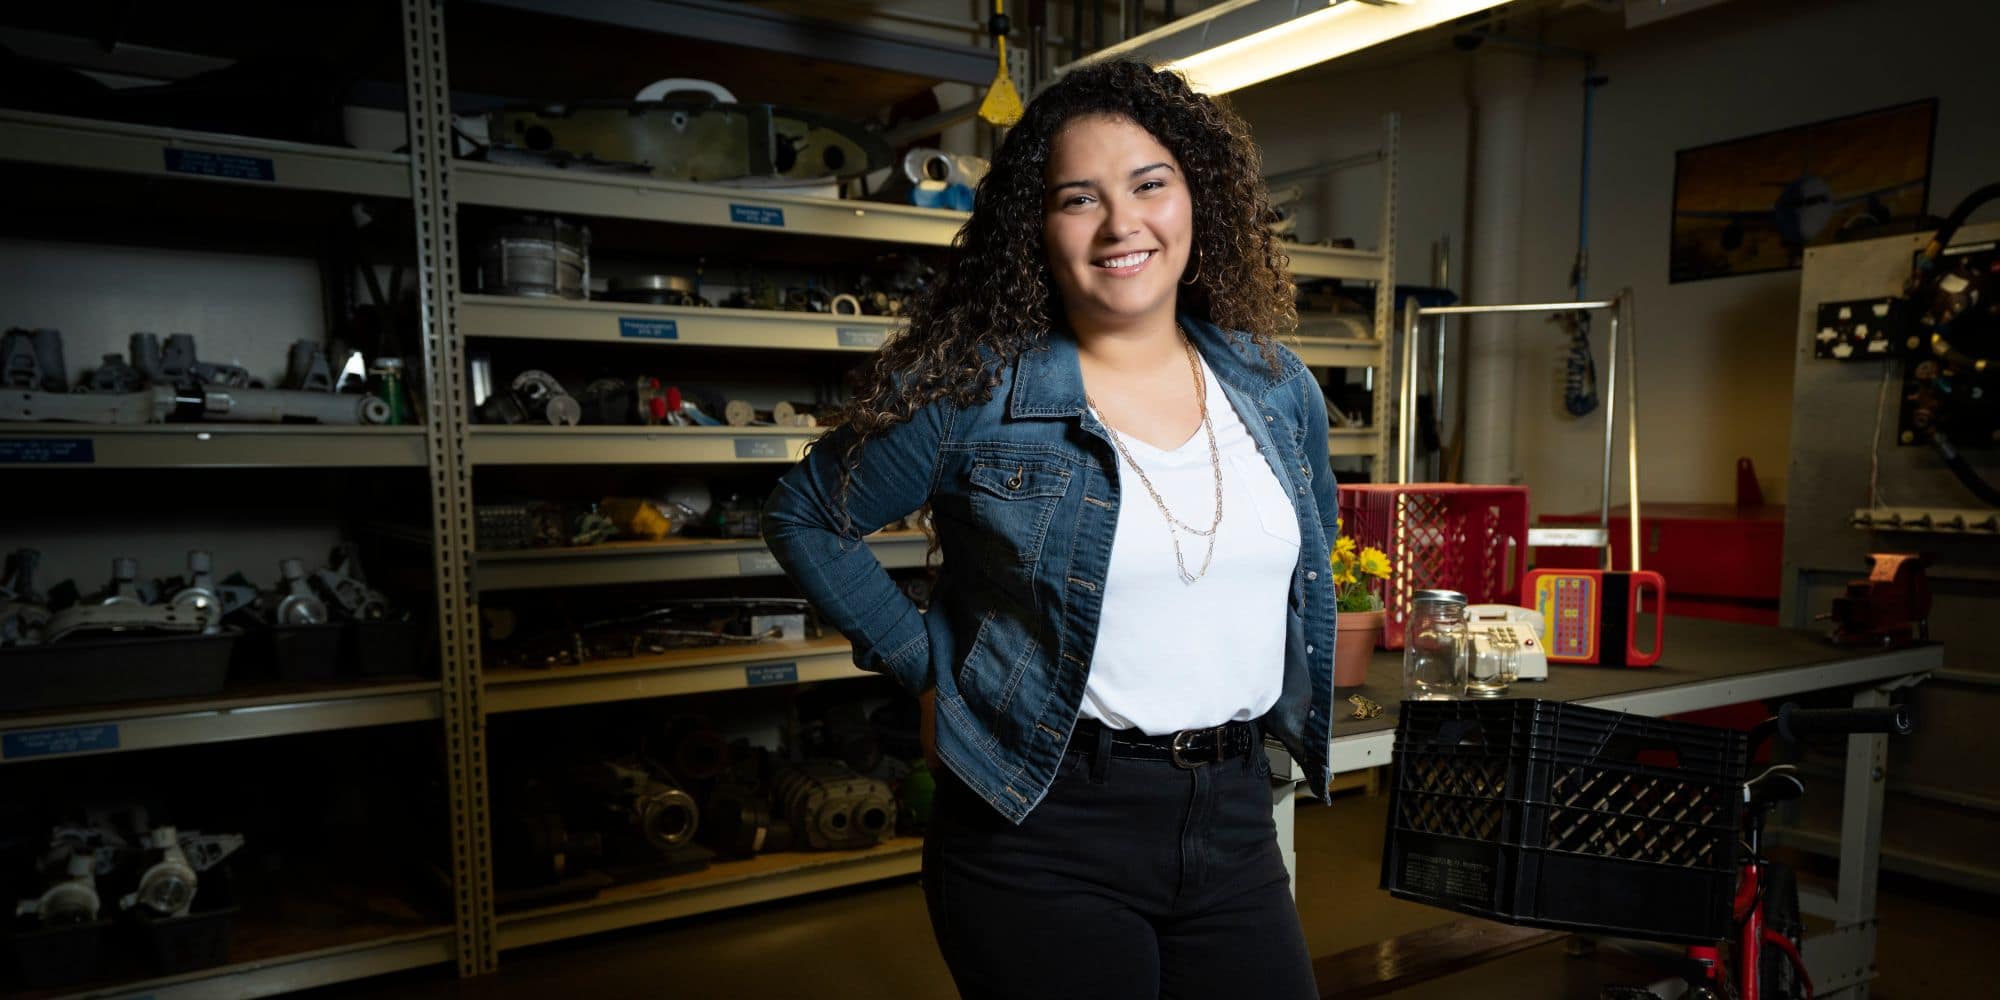 Aerospace Engineering major Michaelle Ramos ('22) gave an advanced aerospace engineering lecture in Spanish for Atomicas Tremendas, a program for young women in Latin America interested in STEM. (Photo: Embry-Riddle)